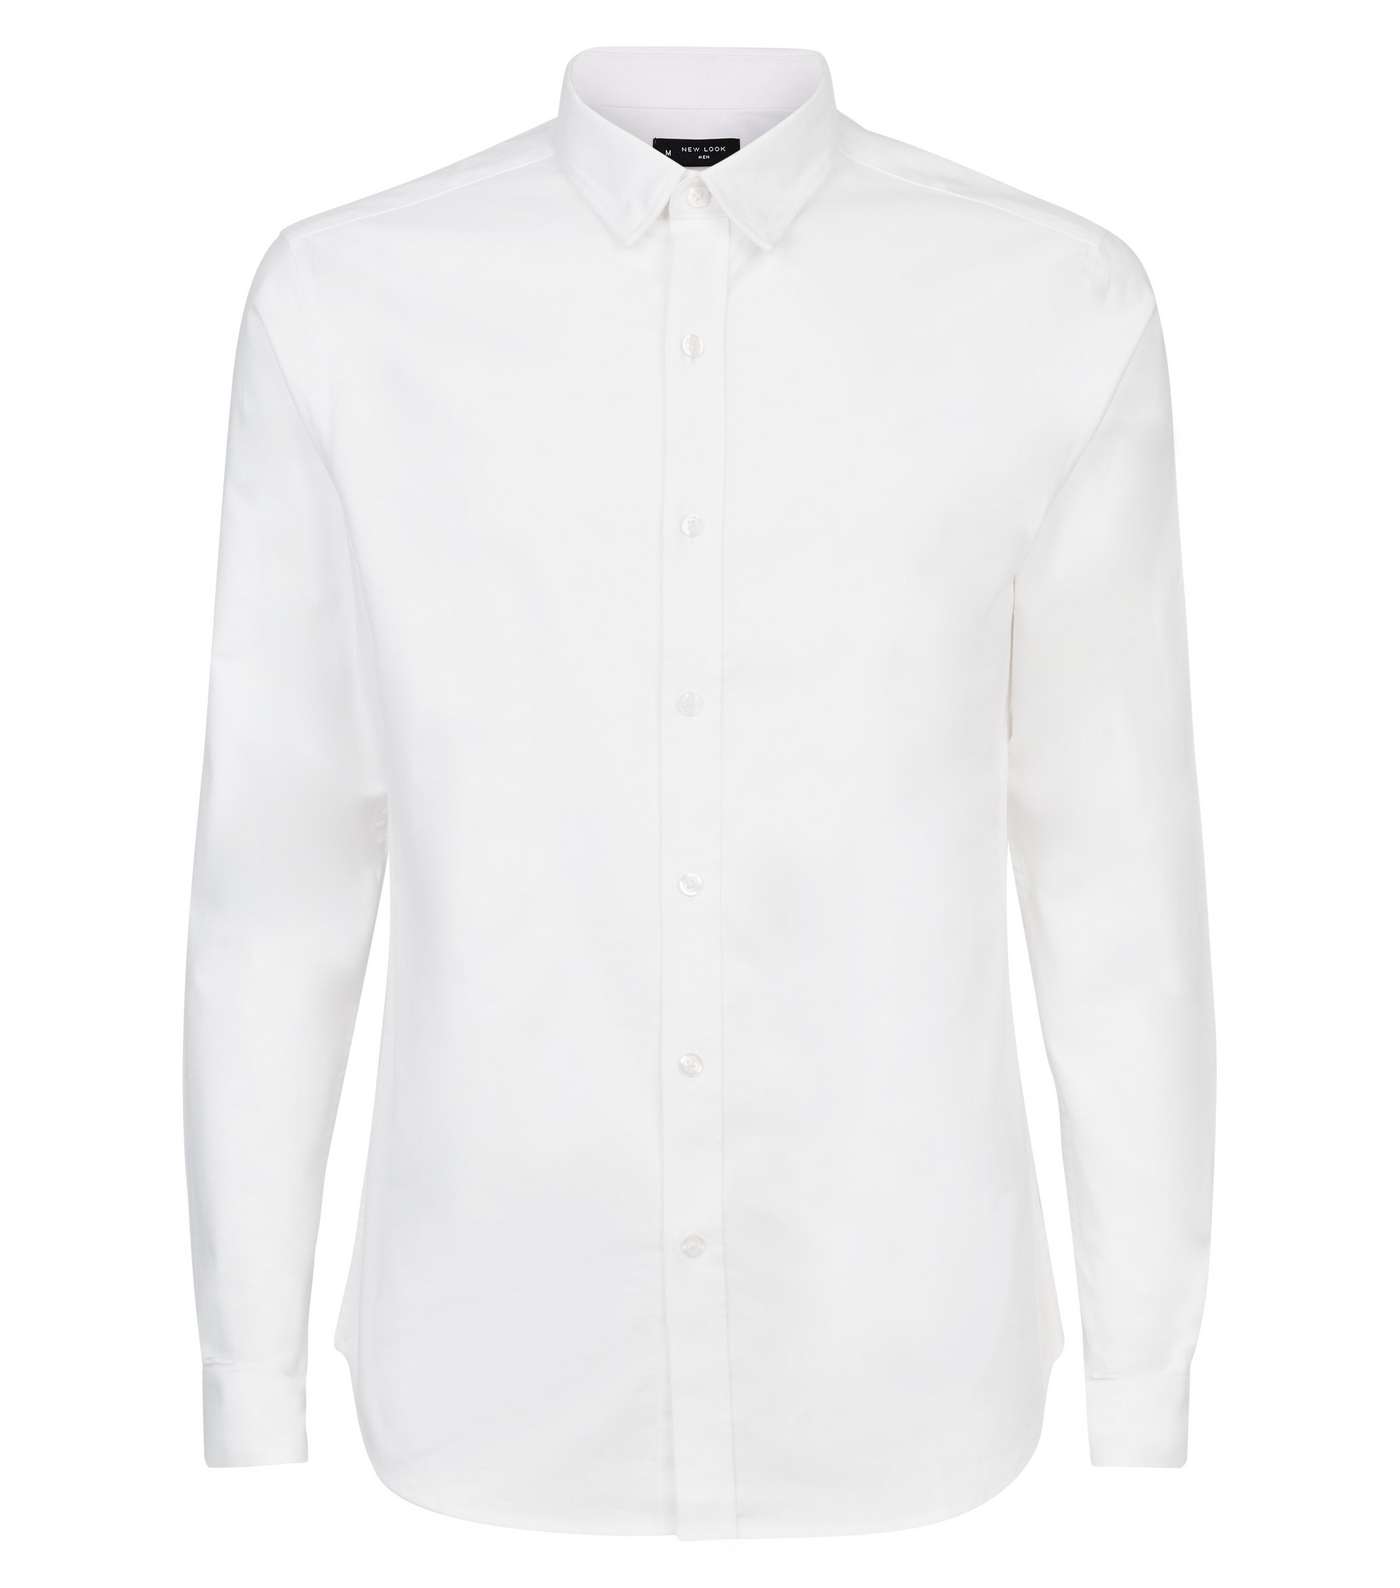 White Long Sleeve Muscle Fit Oxford Shirt Image 4